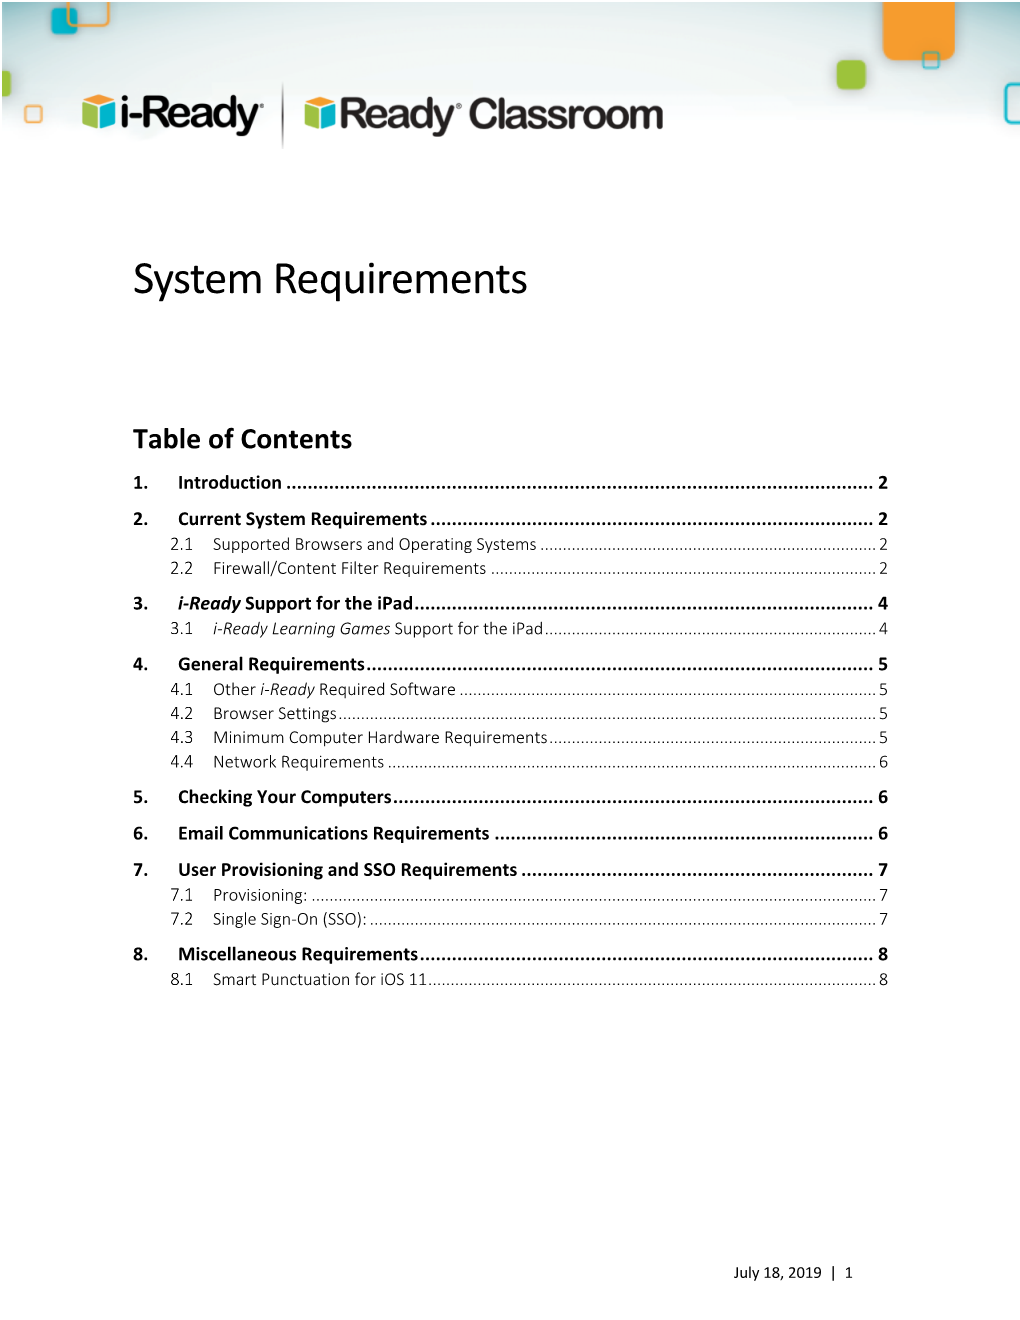 I-Ready System Requirements